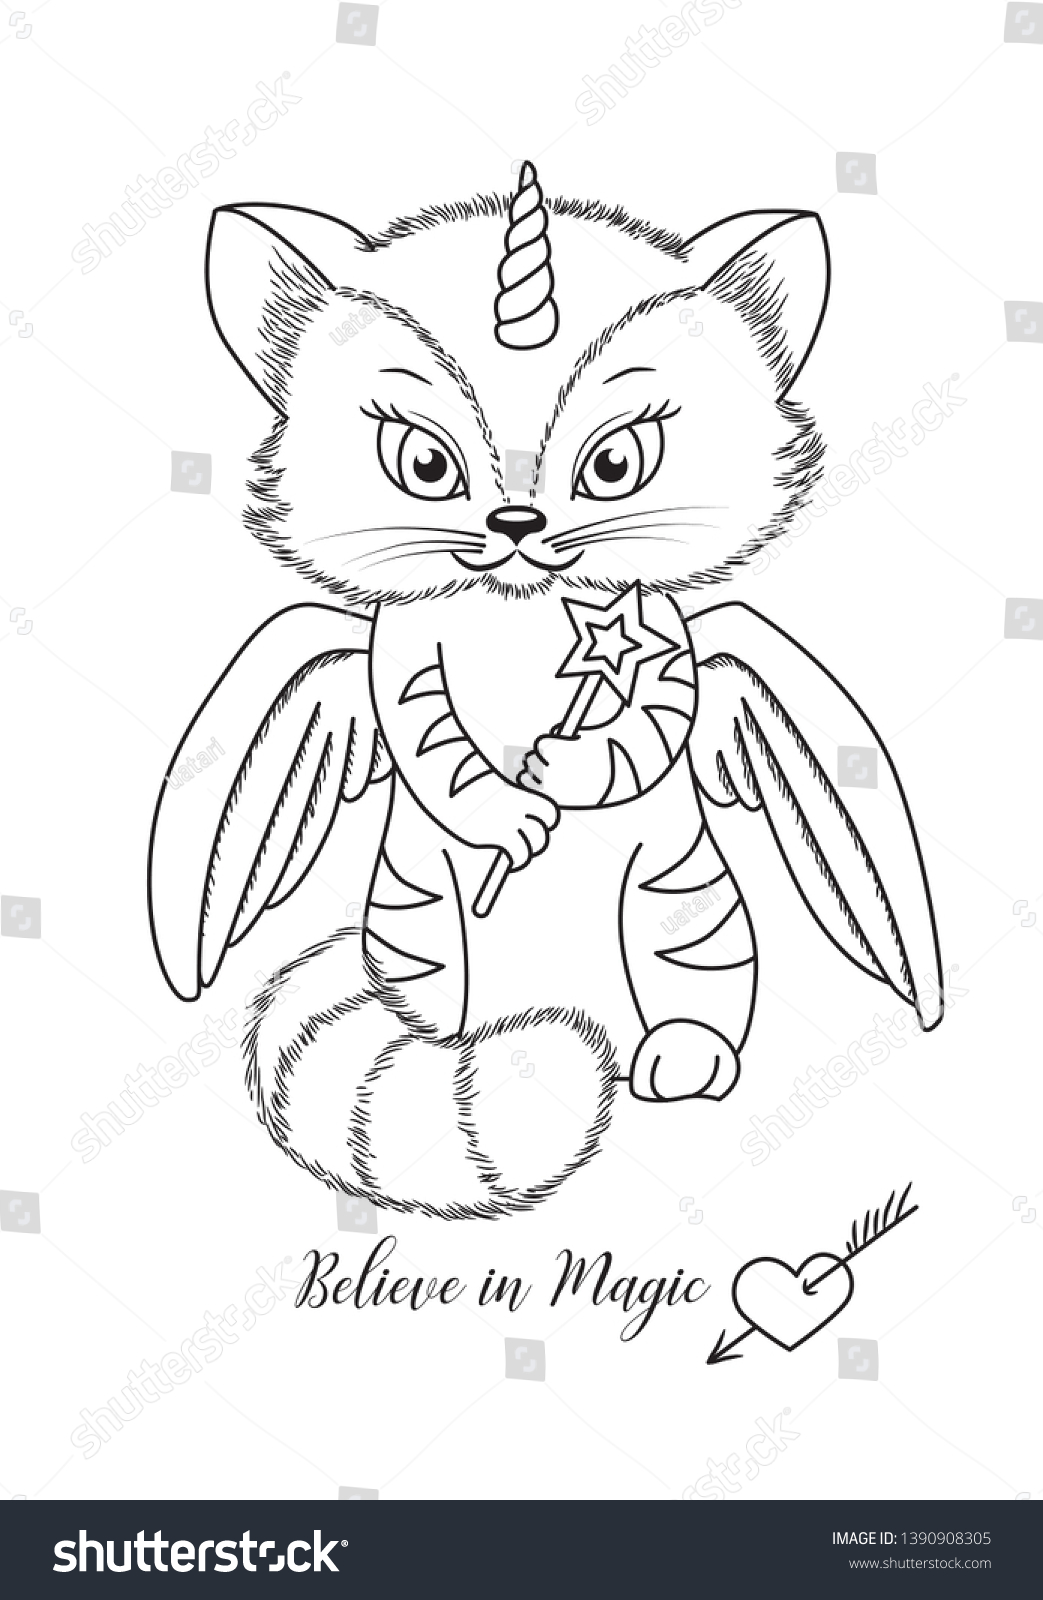 Cat Coloring Page Childrens Background Unicorn Stock Vector ...